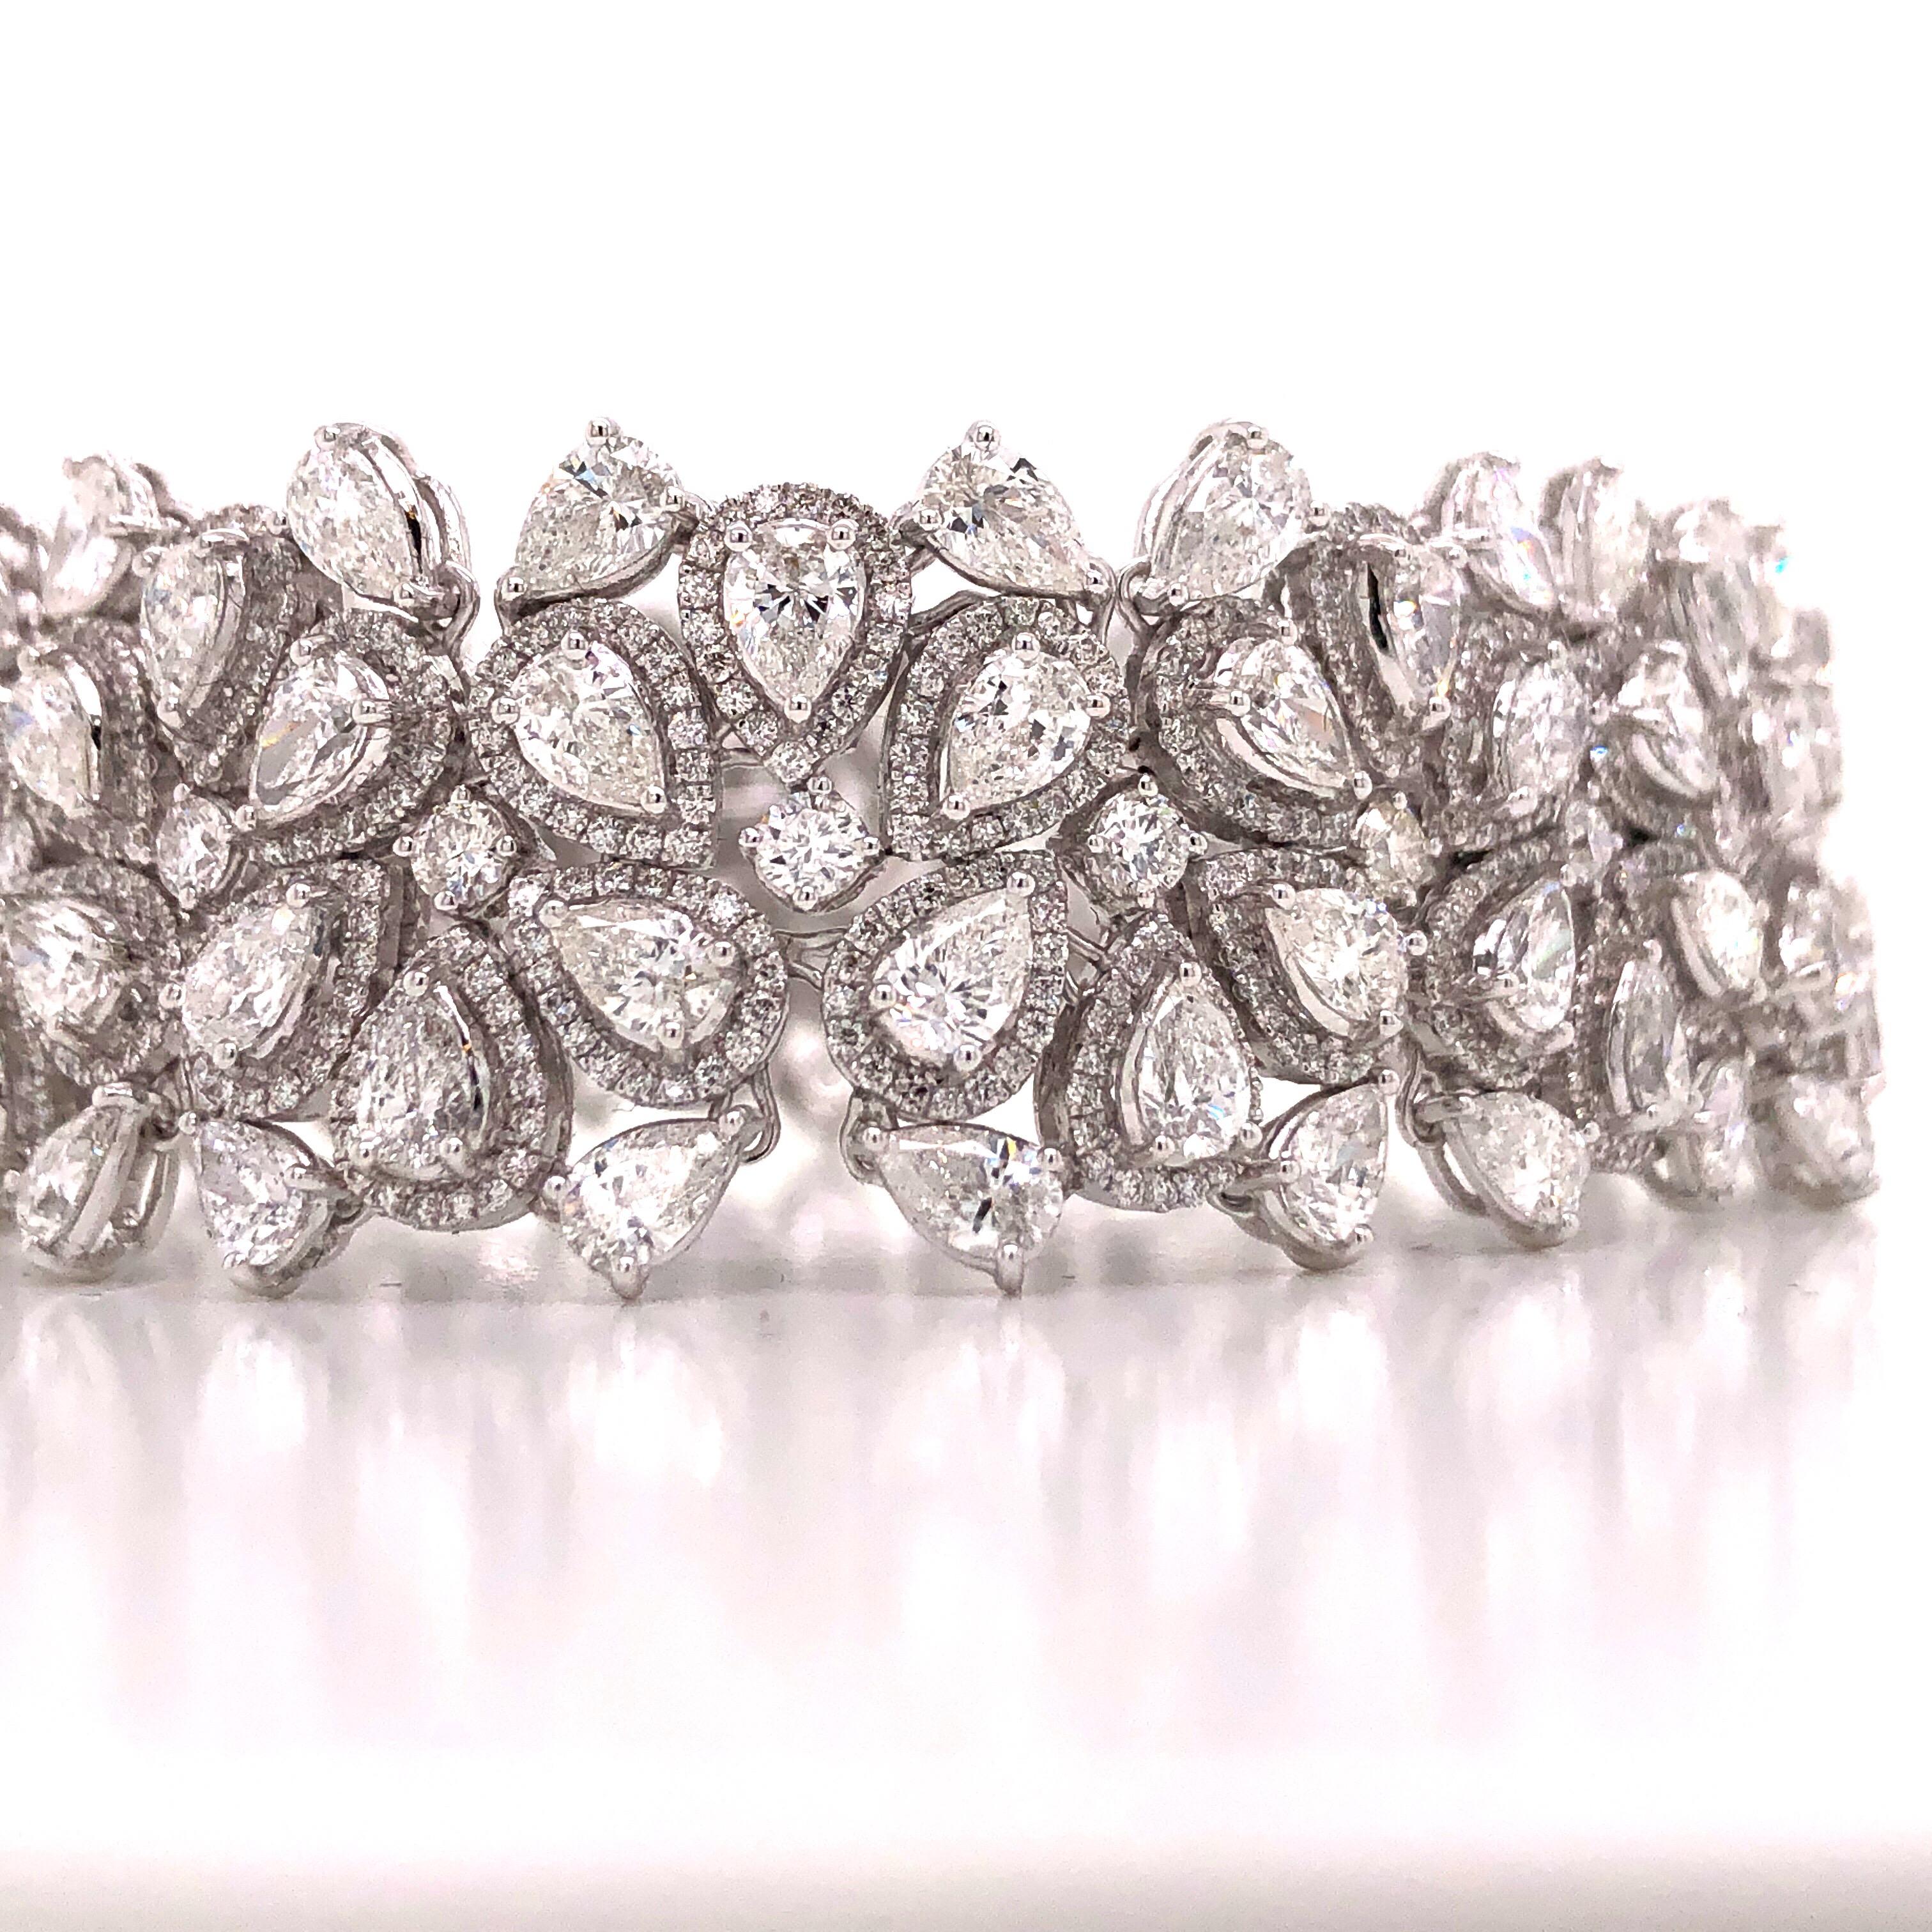 Hand made in the Emilio Atelier this bracelet is 21mm wide and 7 inches long. 265 pear shape and round diamonds totaling approx 22.20 carats of diamonds. Set in 18k white gold. 
Color: E-F 
Clarity: Vvs1-Vs2 overall 
Professional appraisal included